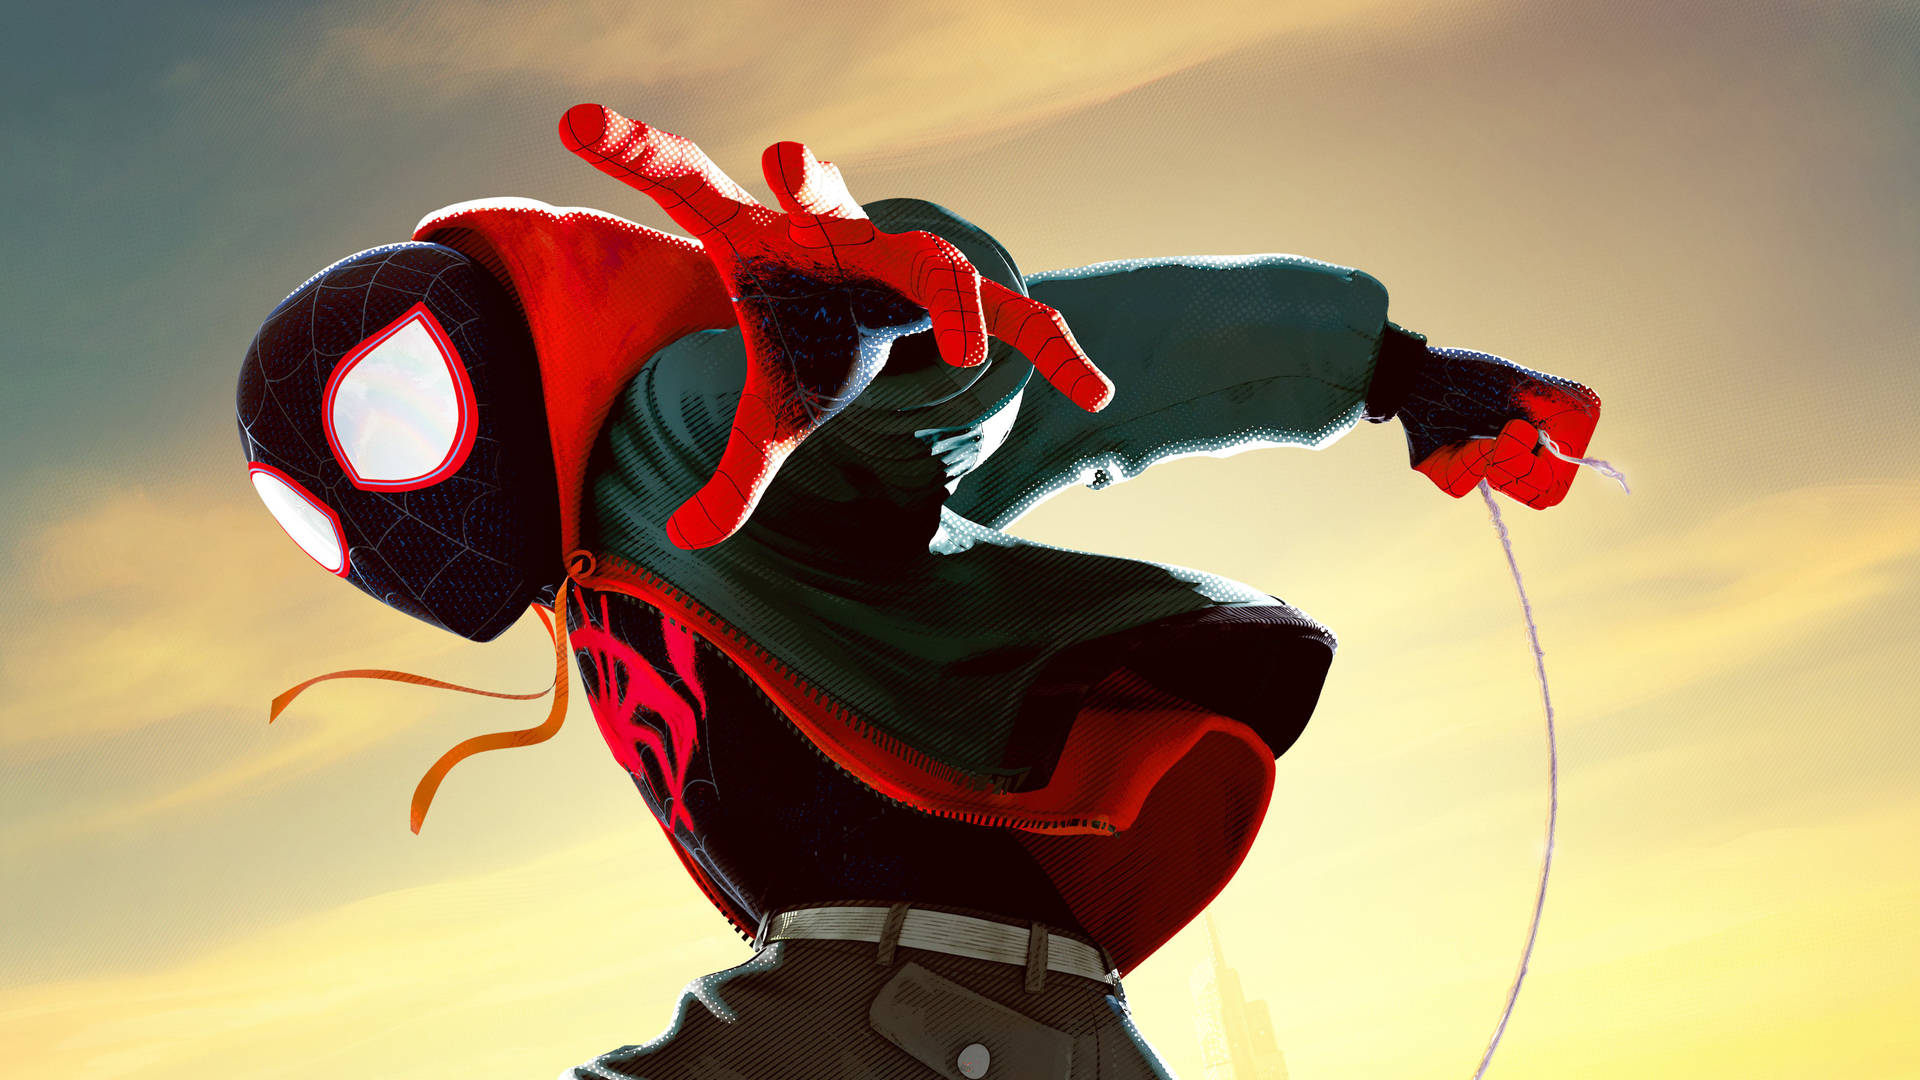 Miles Morales soaring far above the skyline, embracing the sunset. Wallpaper